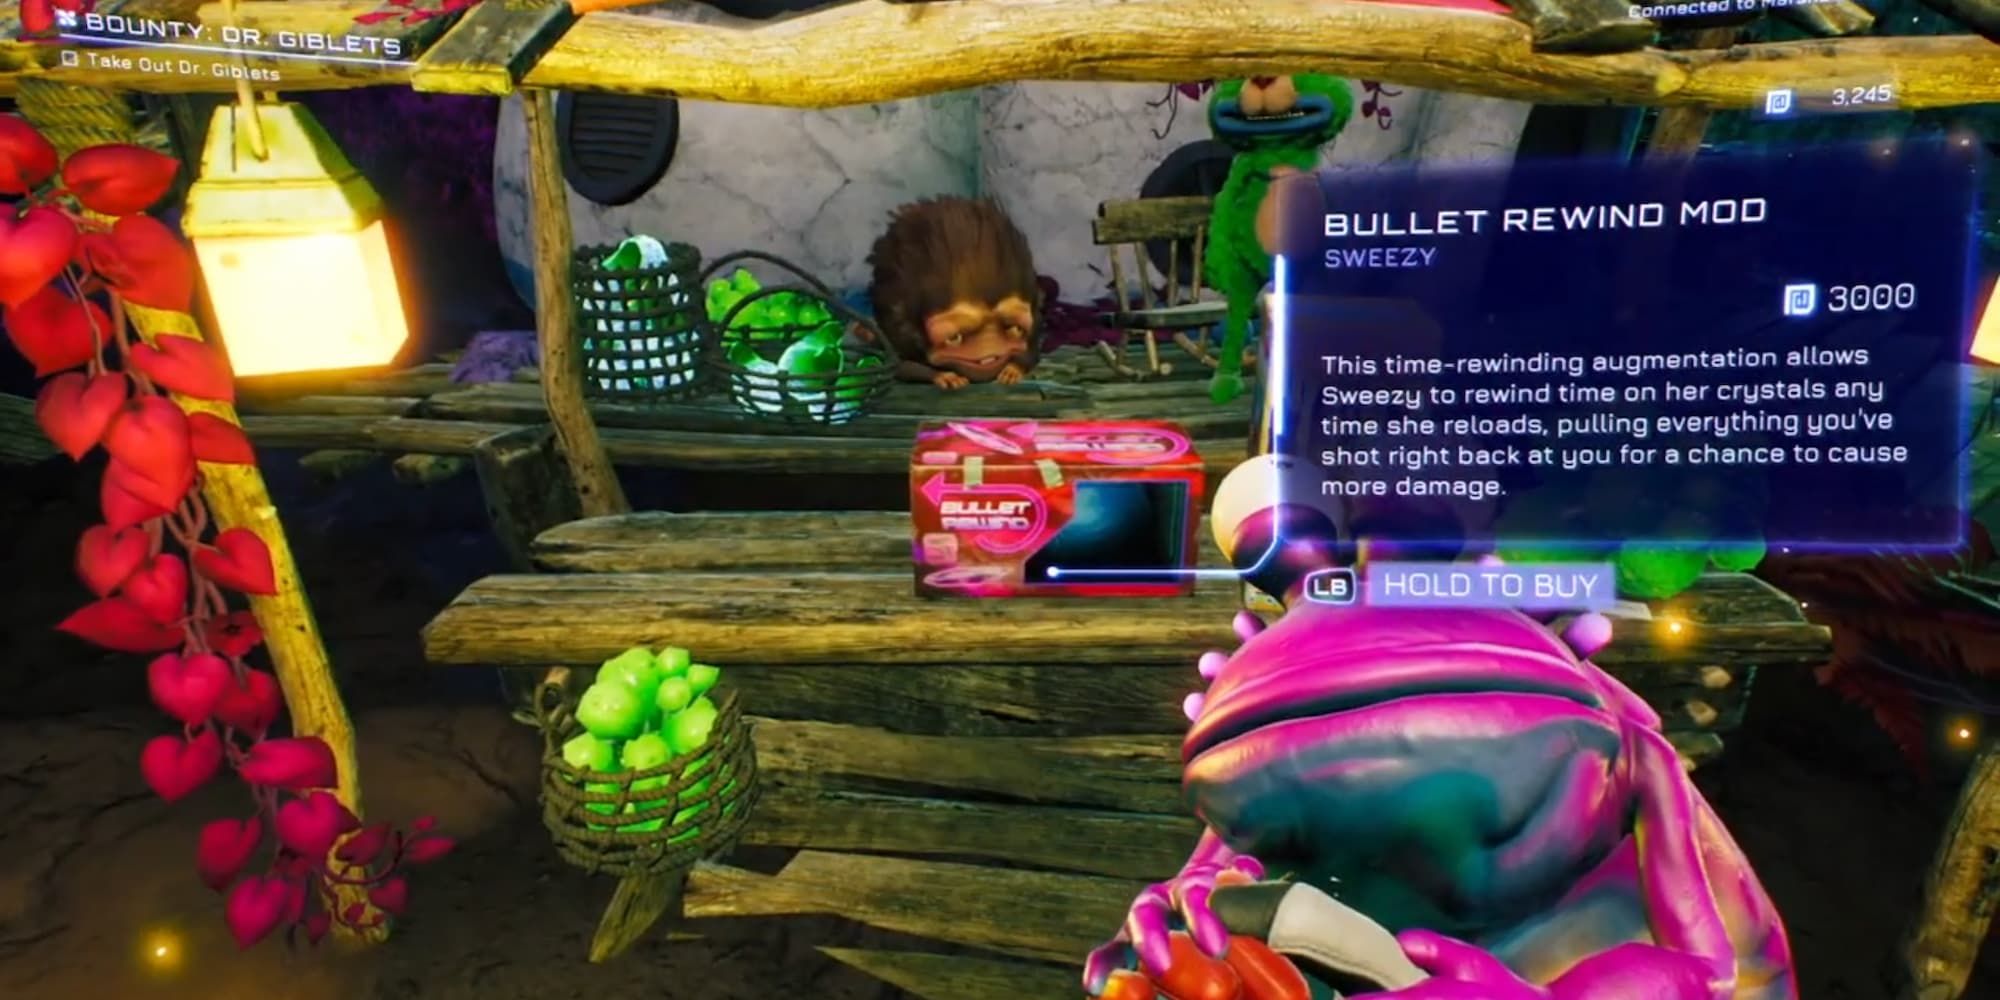 The player finds the Bullet Rewind mod available for purchase in High on Life.